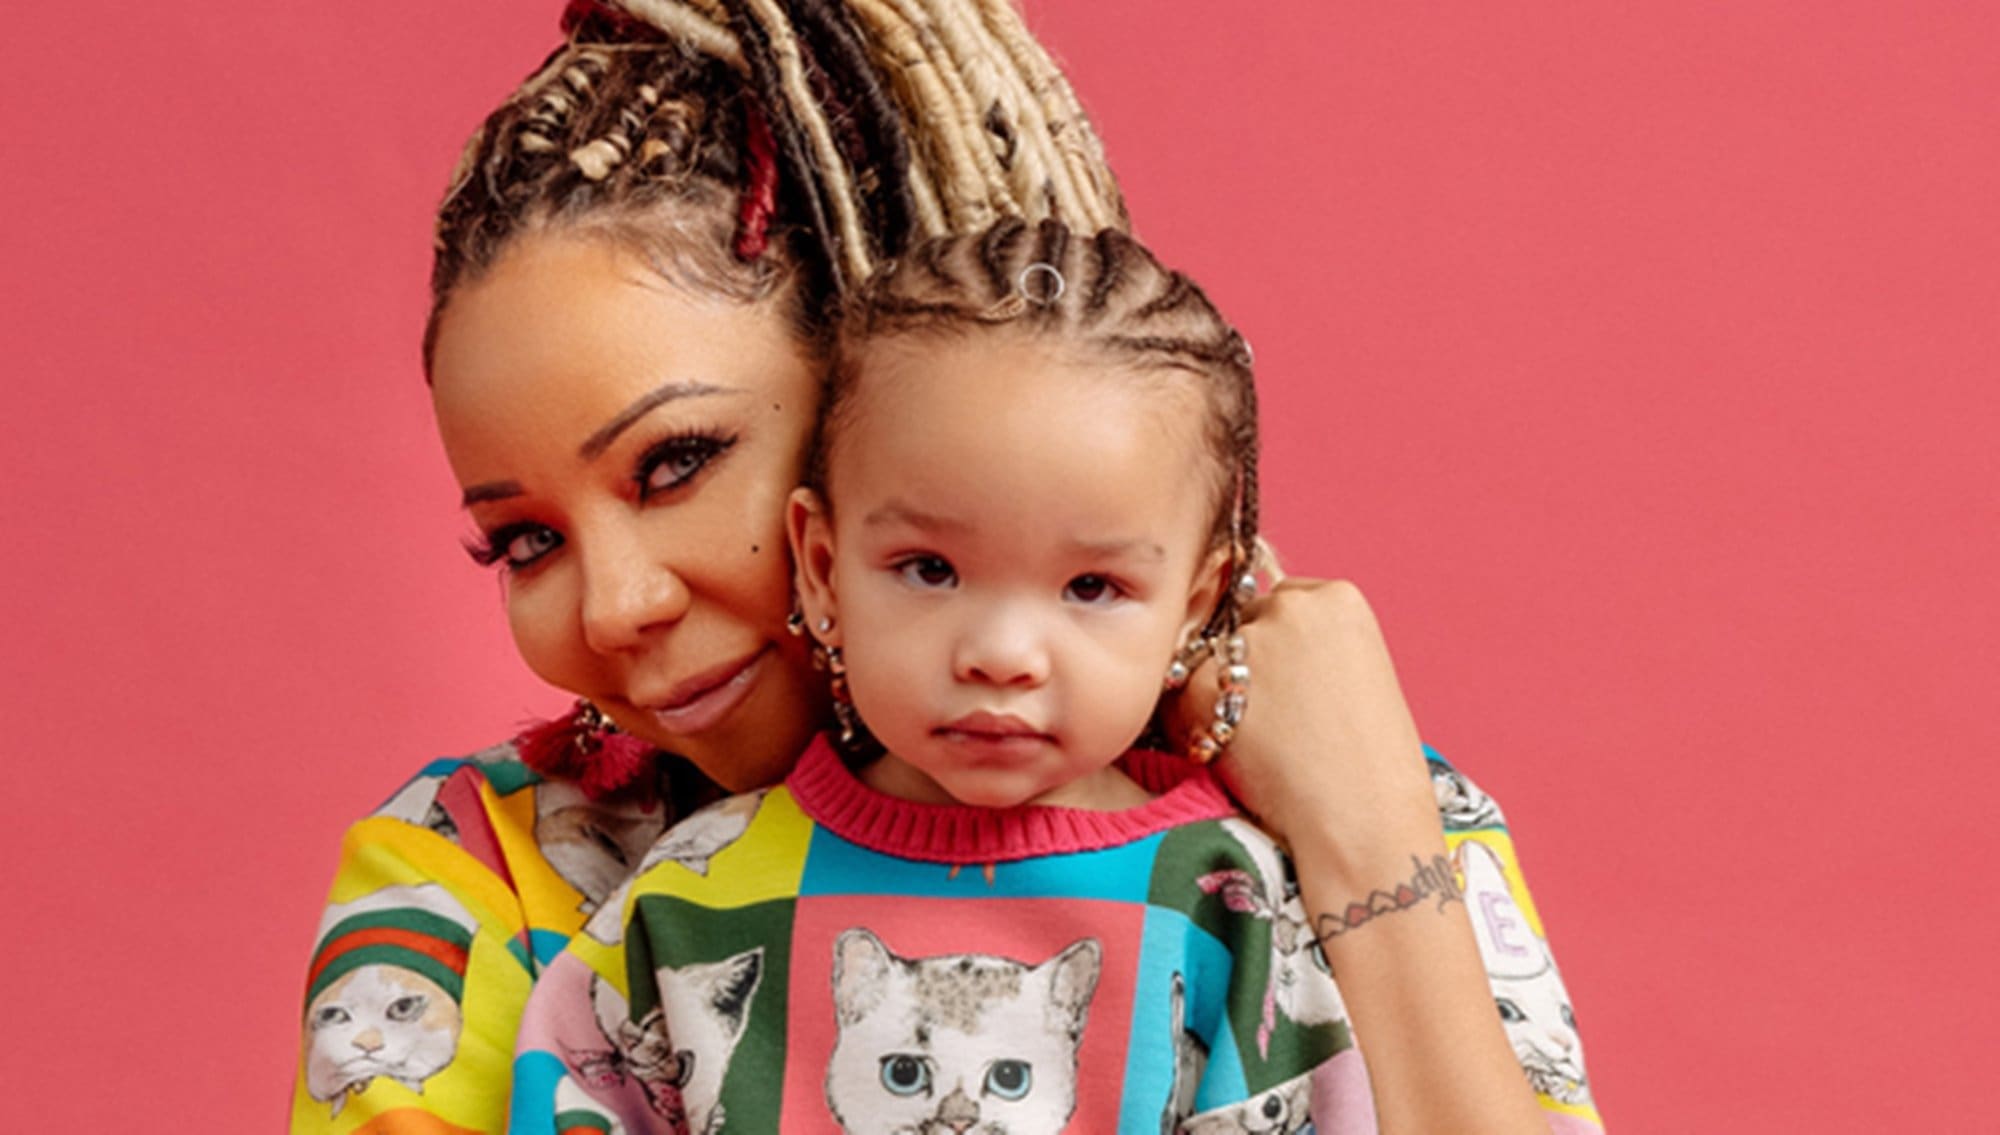 tiny-harris-makes-fans-day-with-this-video-featuring-heiress-harris-2